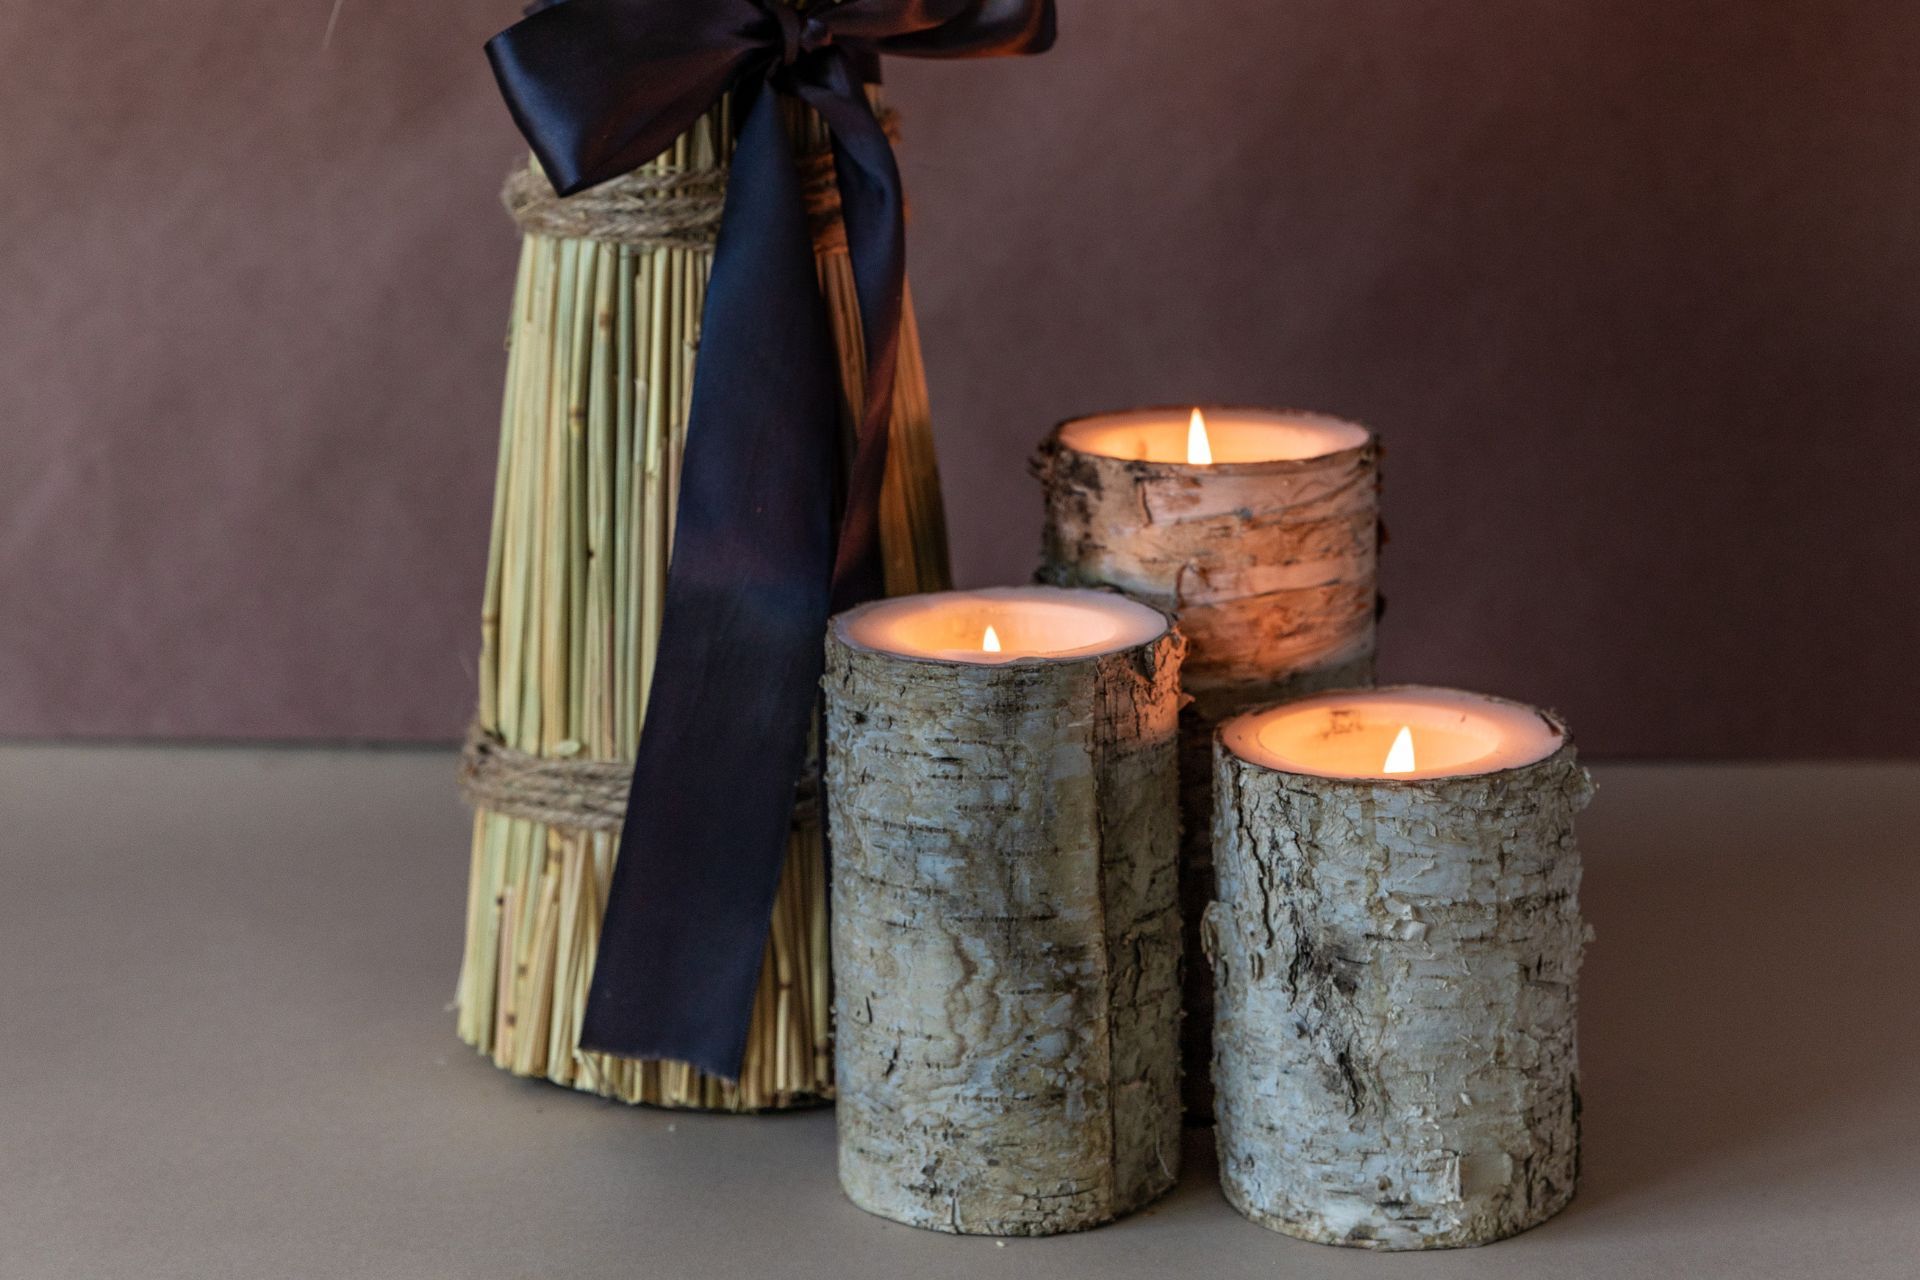 Candles for festive home decor shopping